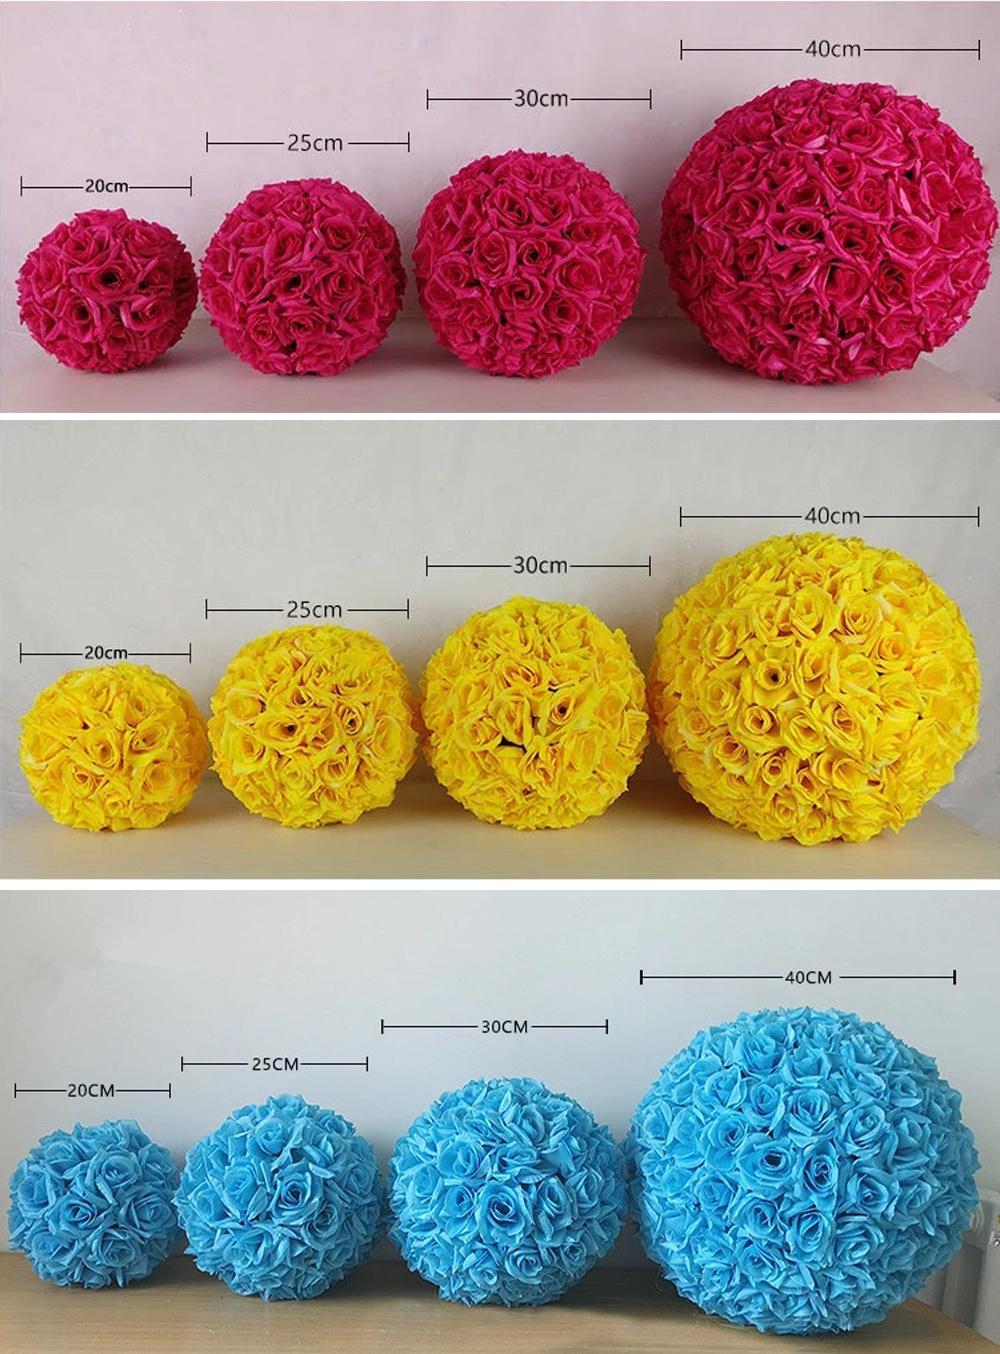 Artificial Rose Flower Ball High Quality Artificial Kissing Ball with Different Colors for Wedding Decoration